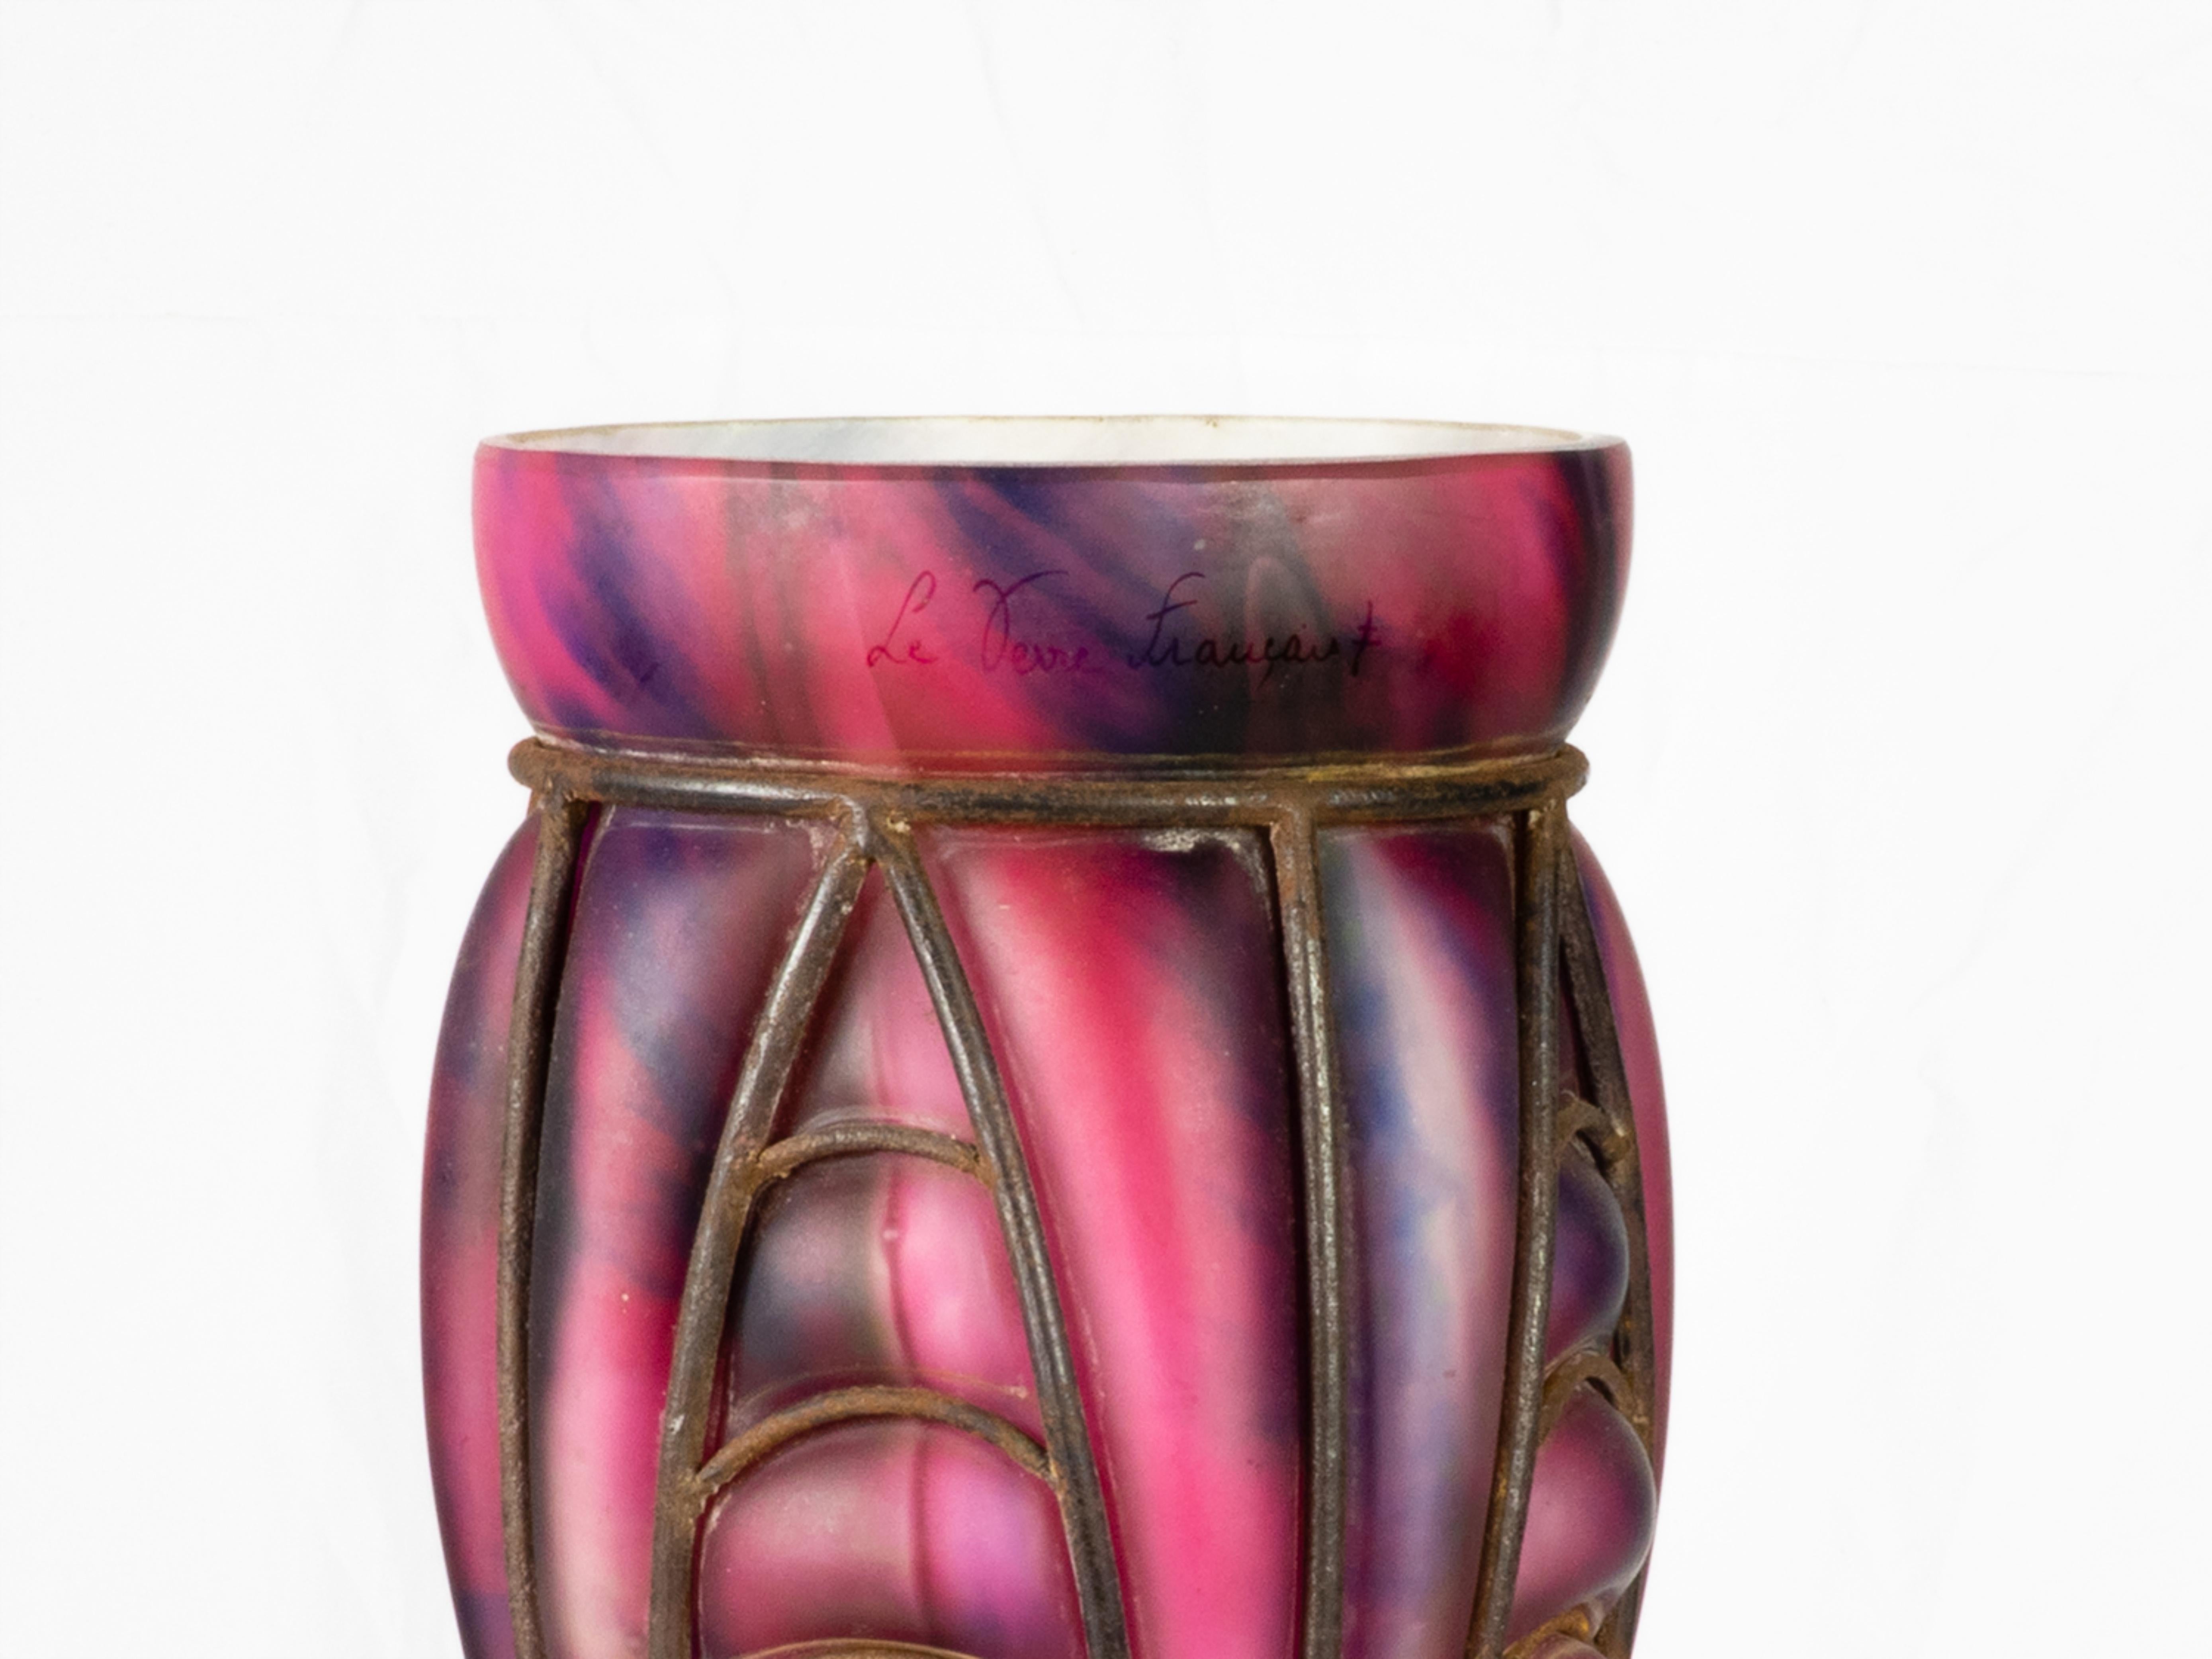 A Verrerie D'Art Lorraine glass vase with wrought iron armour in the Majorelle style, from Croismare, near Nancy, one of the hubs  of glass manufacturing.
It features a pink and purple marbled upper body with a grayish green background, all wrapped